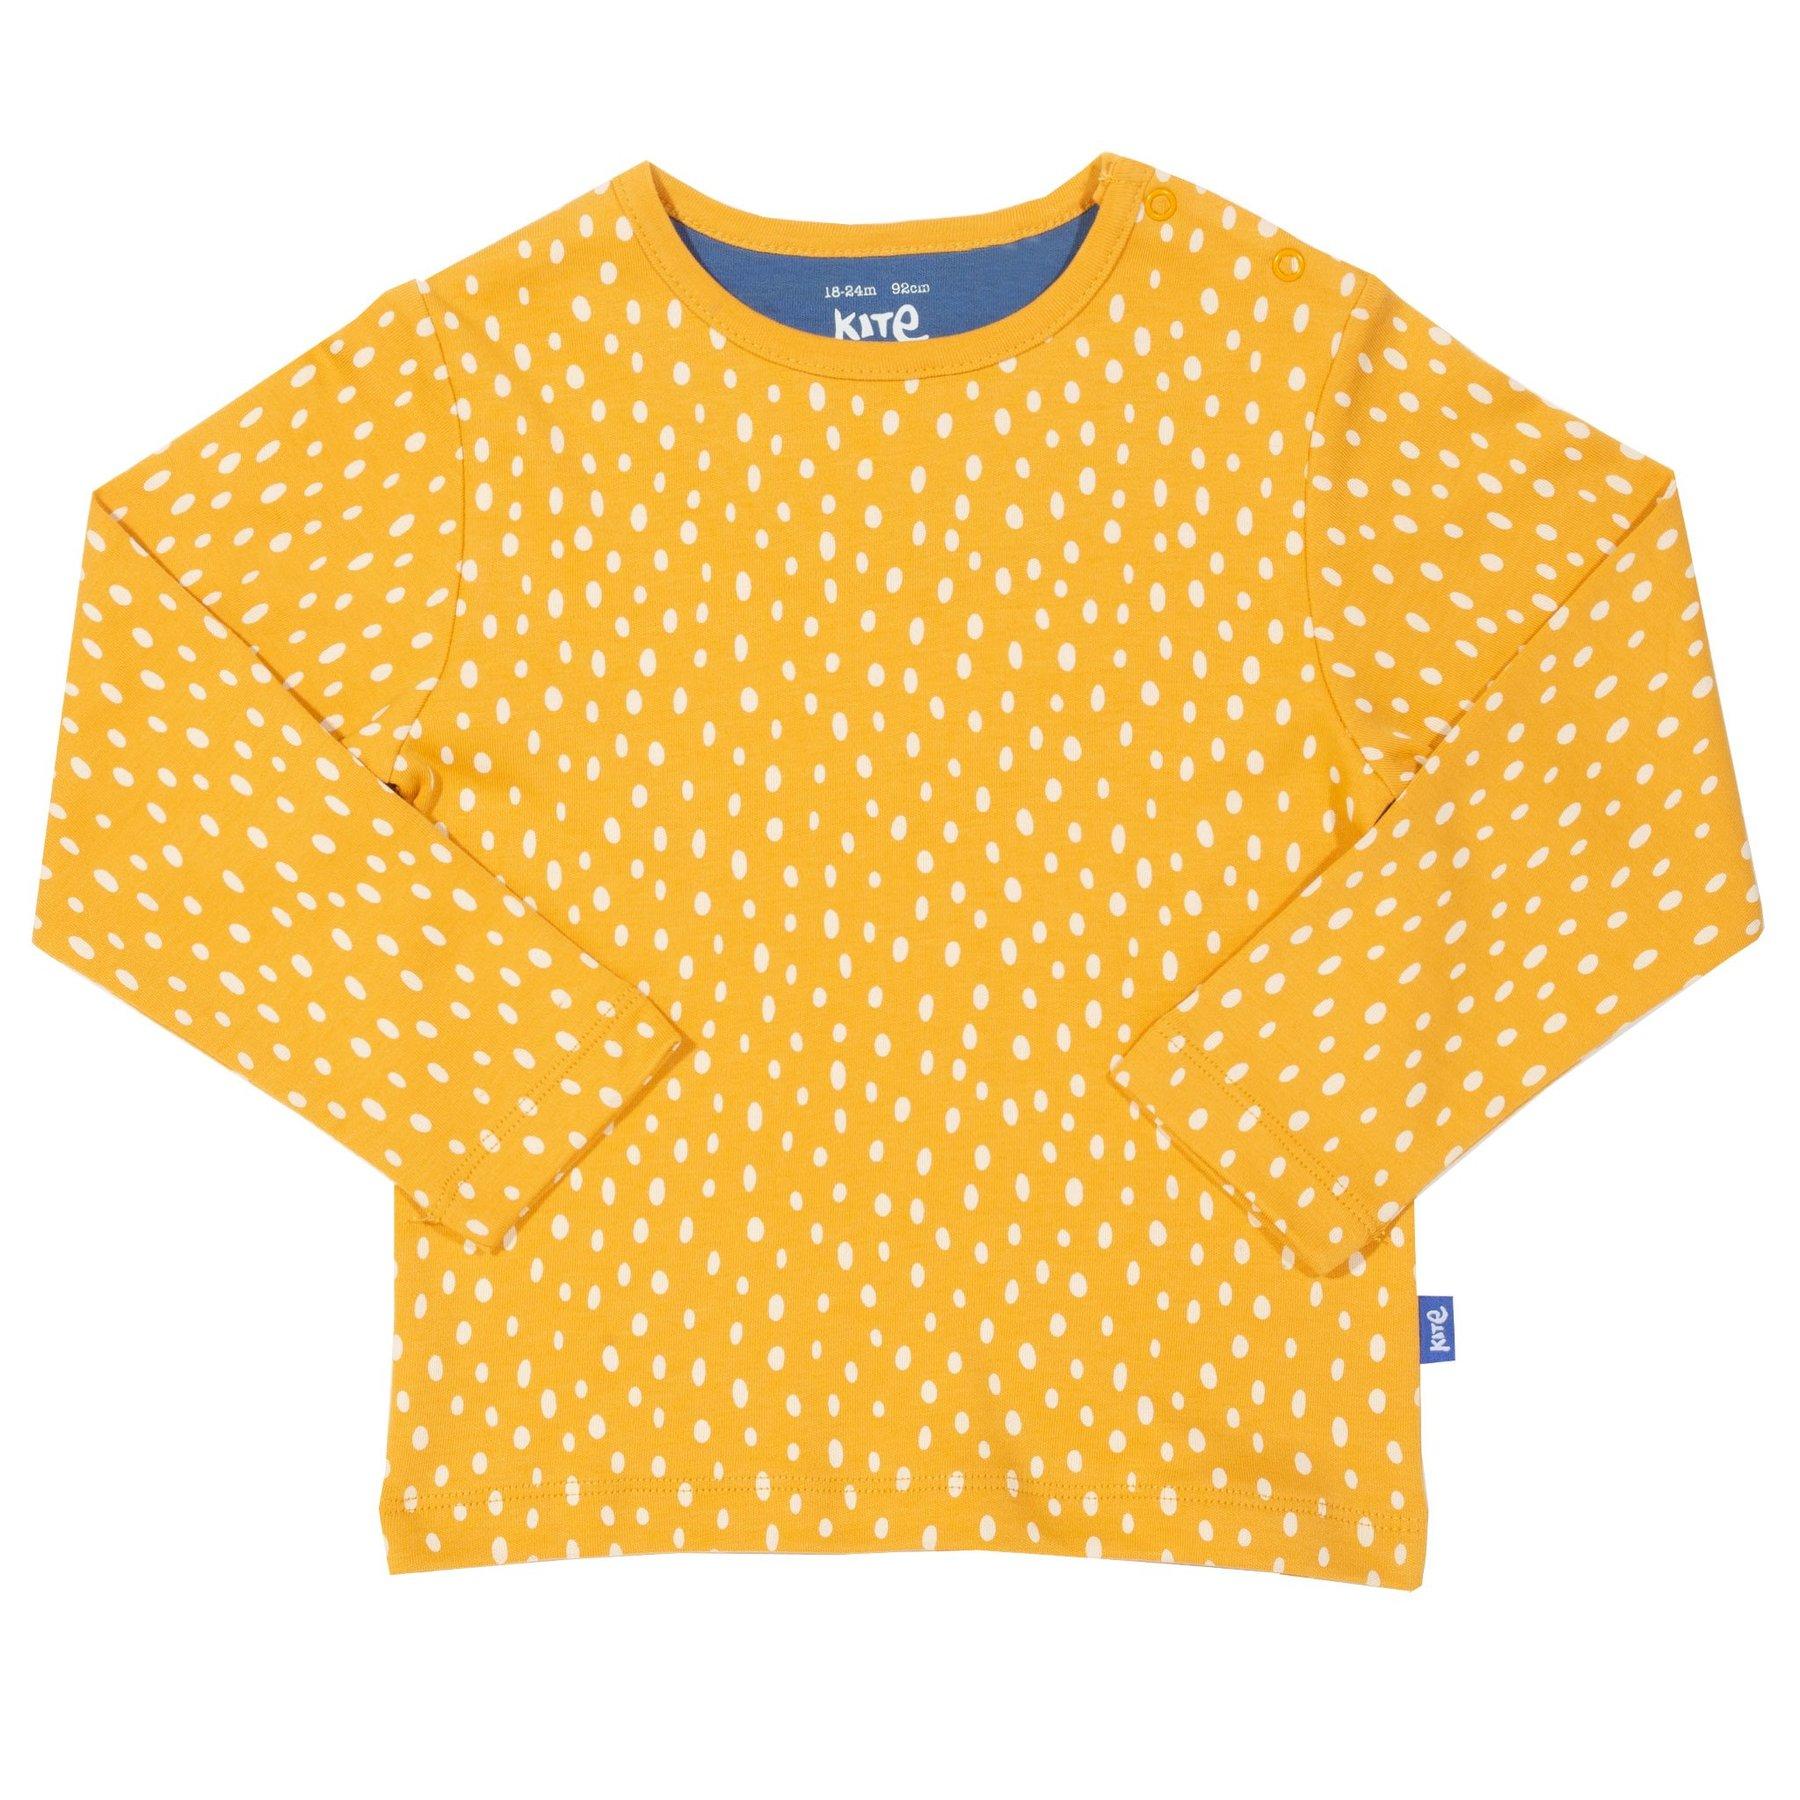 Kite Clothing Speckle T-Shirt front